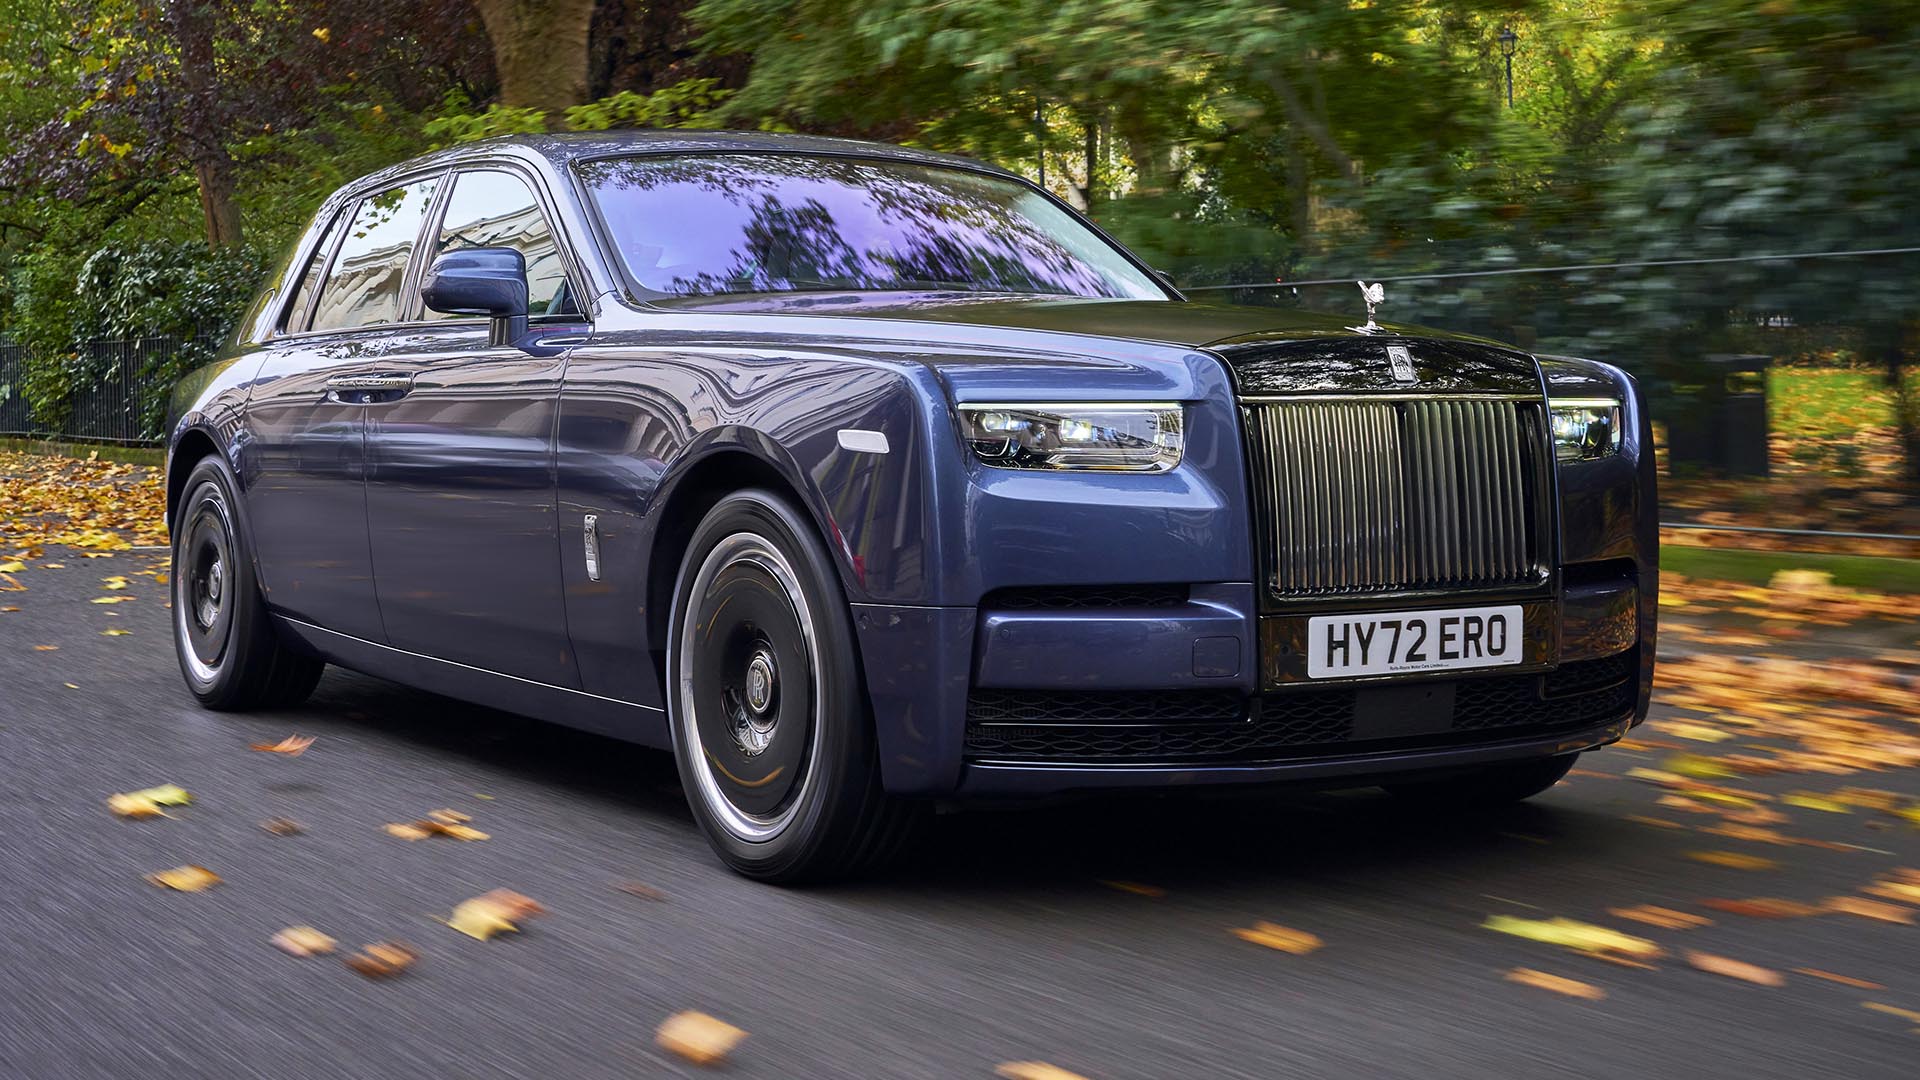 Front-angled view of a blue Rolls Royce Phantom Series II